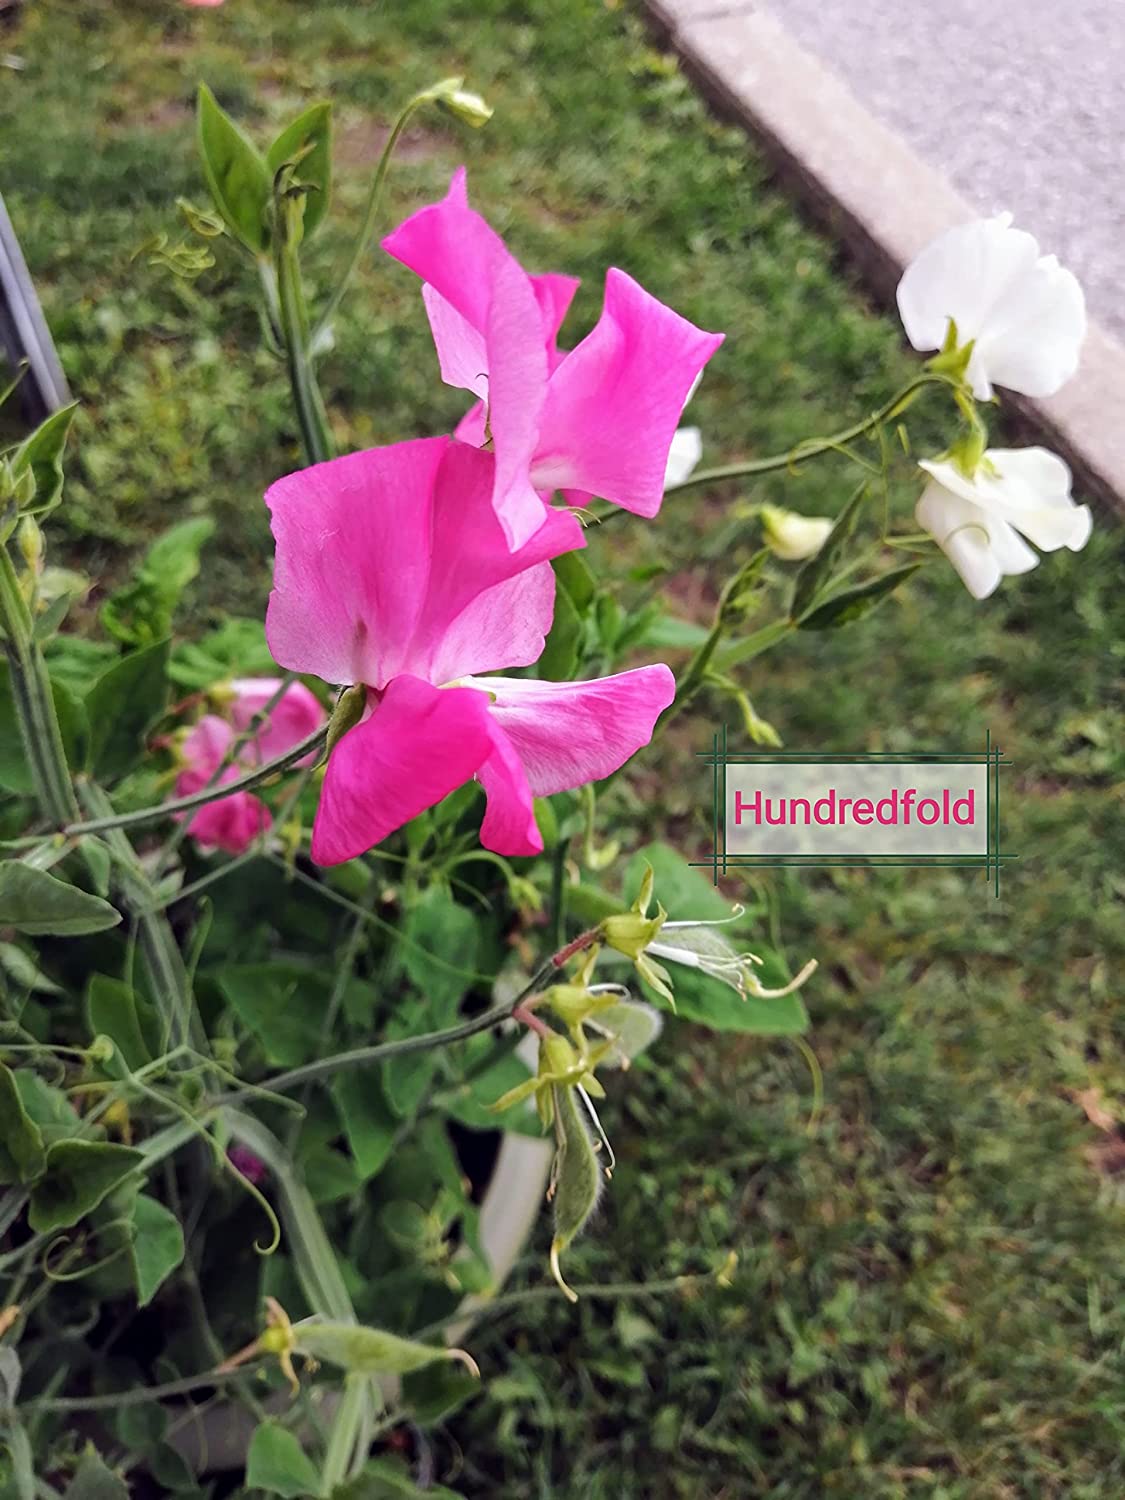 Hundredfold Mammoth Mix Sweet Pea 30 Flower Seeds - Lathyrus odoratus Fragrant Flower Mix of Red, White, Purple and Pink